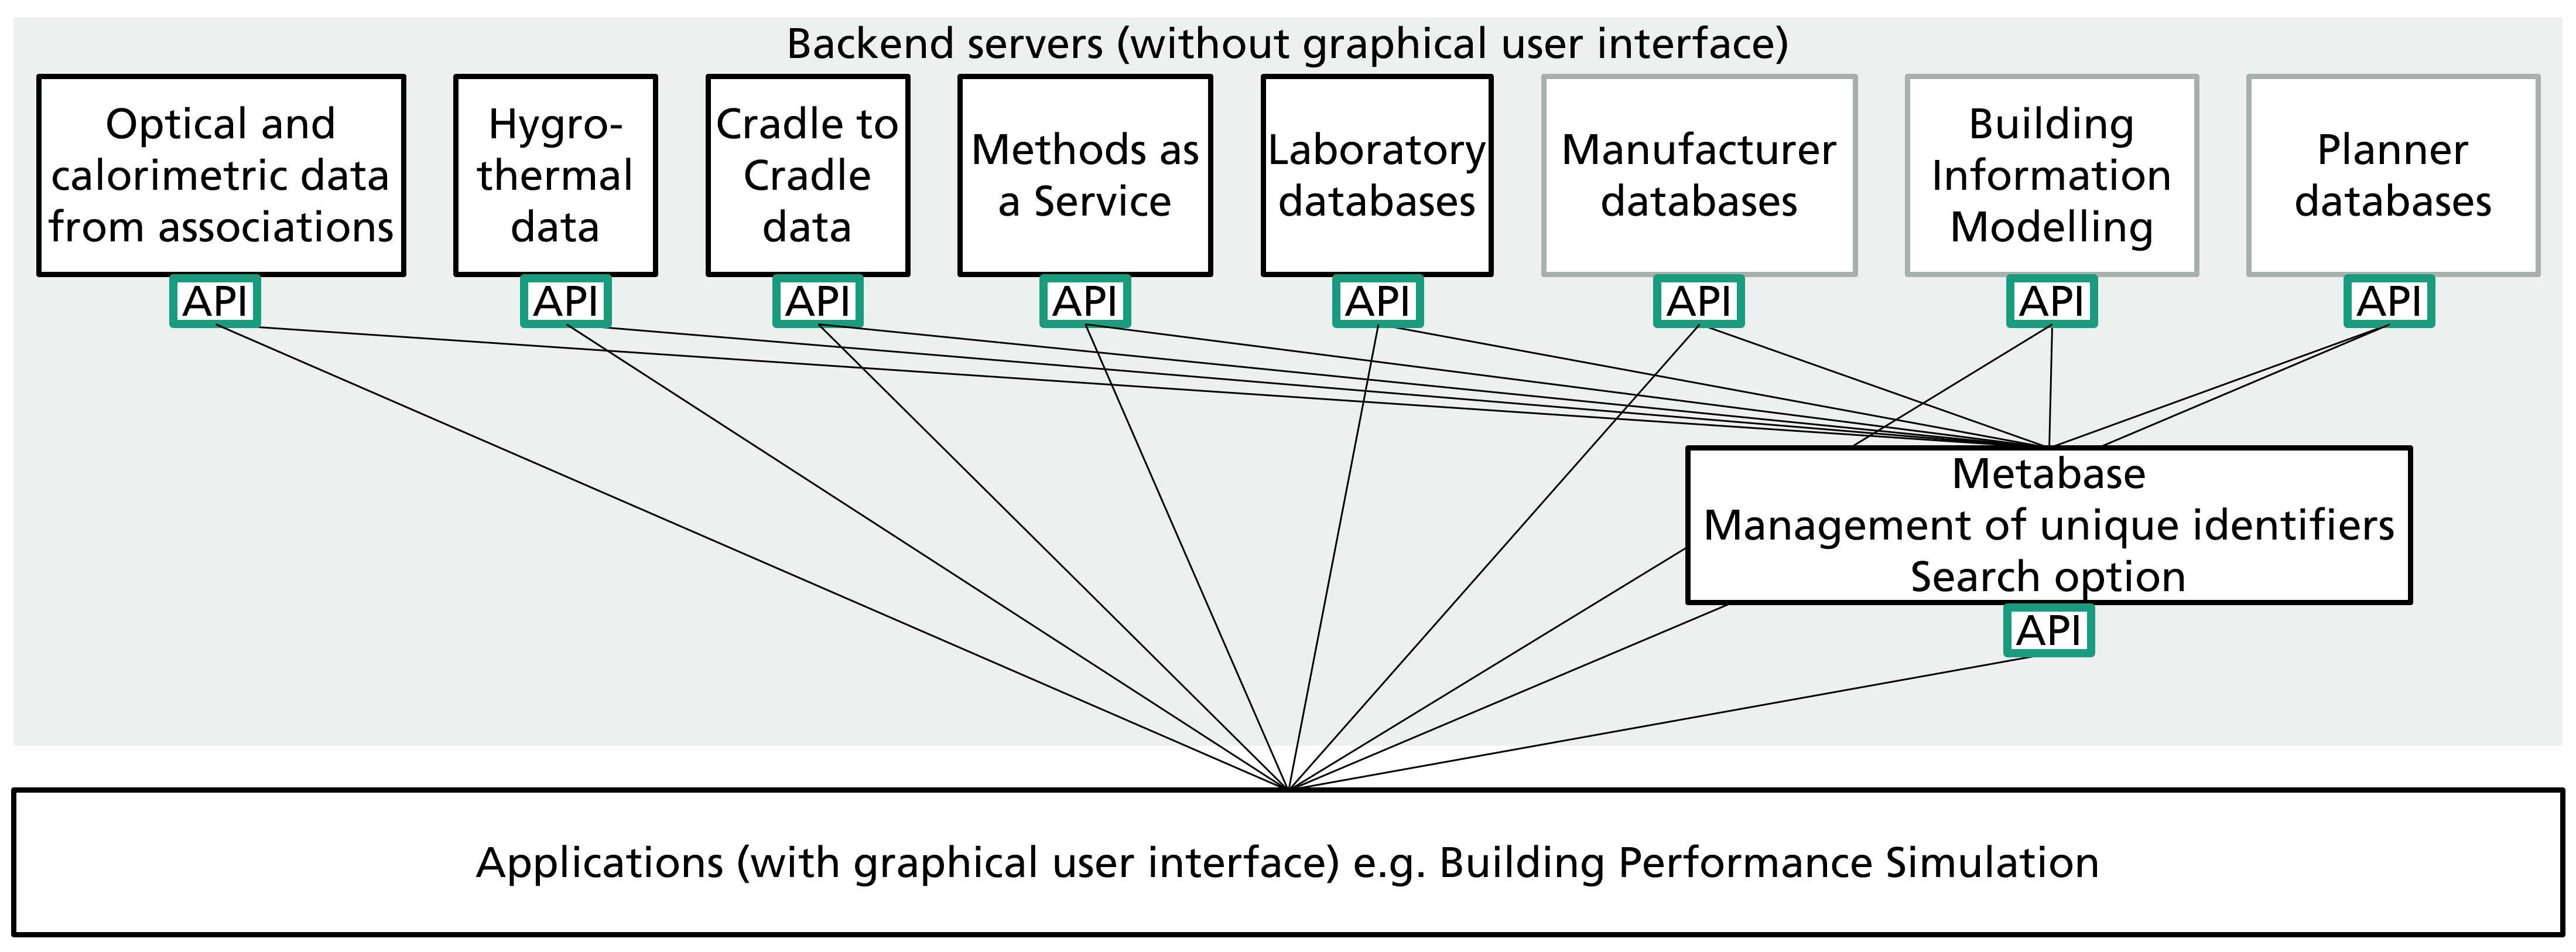 Schematic drawing of different types of servers with a unified interface specification.